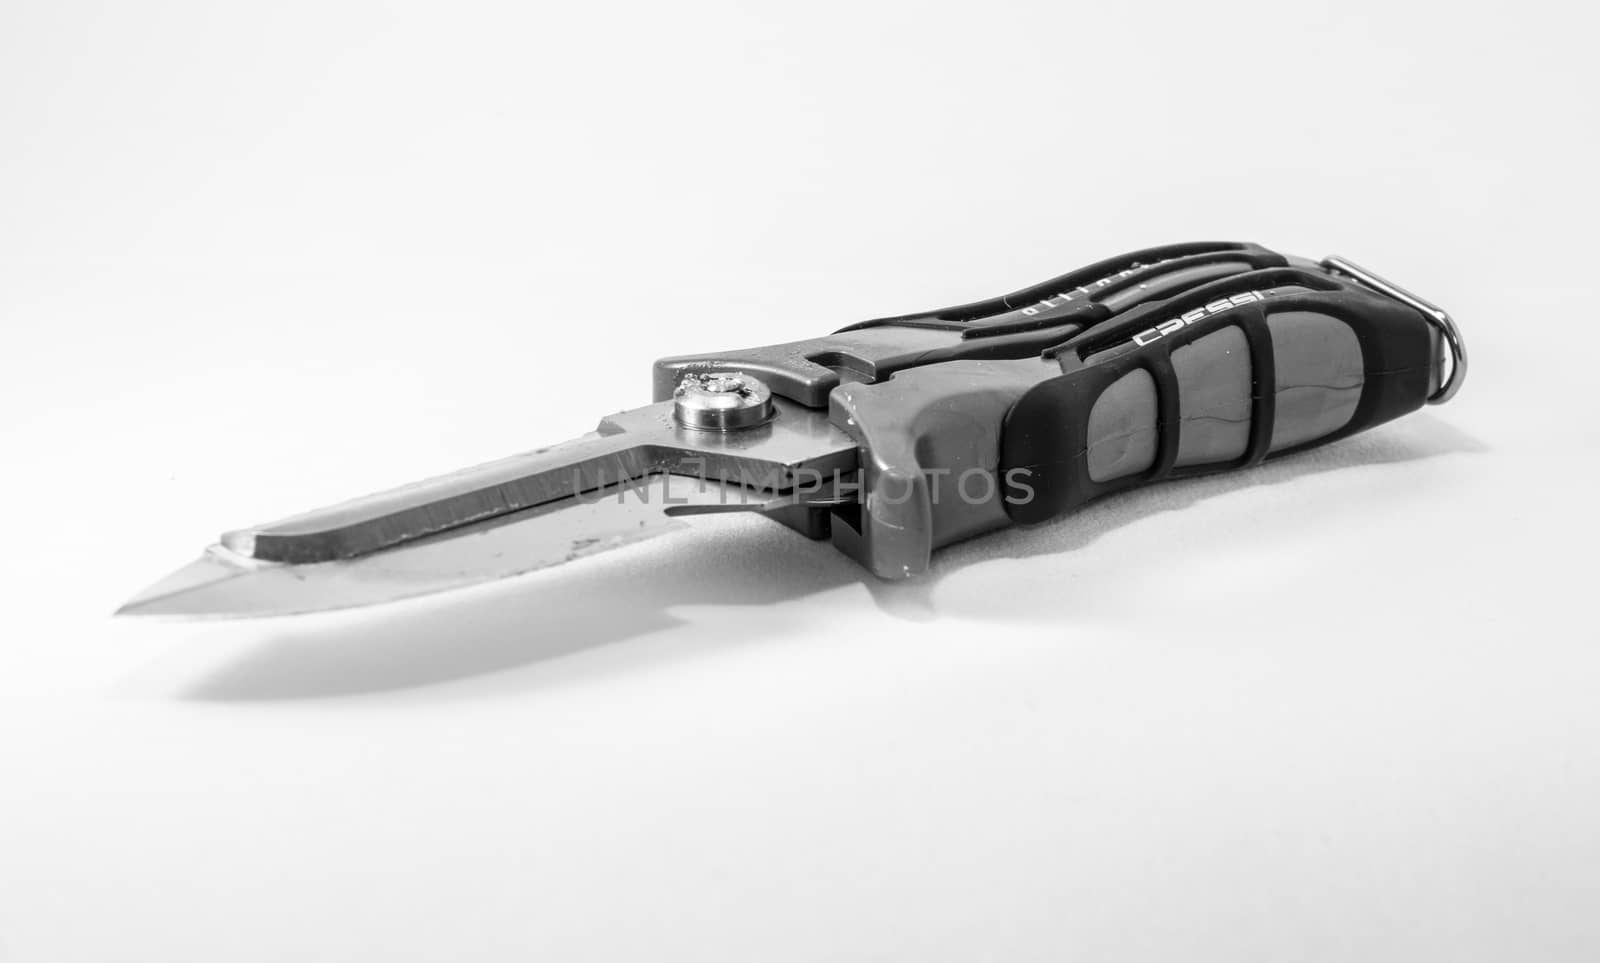 Diving knife from brand Cressi, multi tool knife useful in a lot of different scenario during a dive.